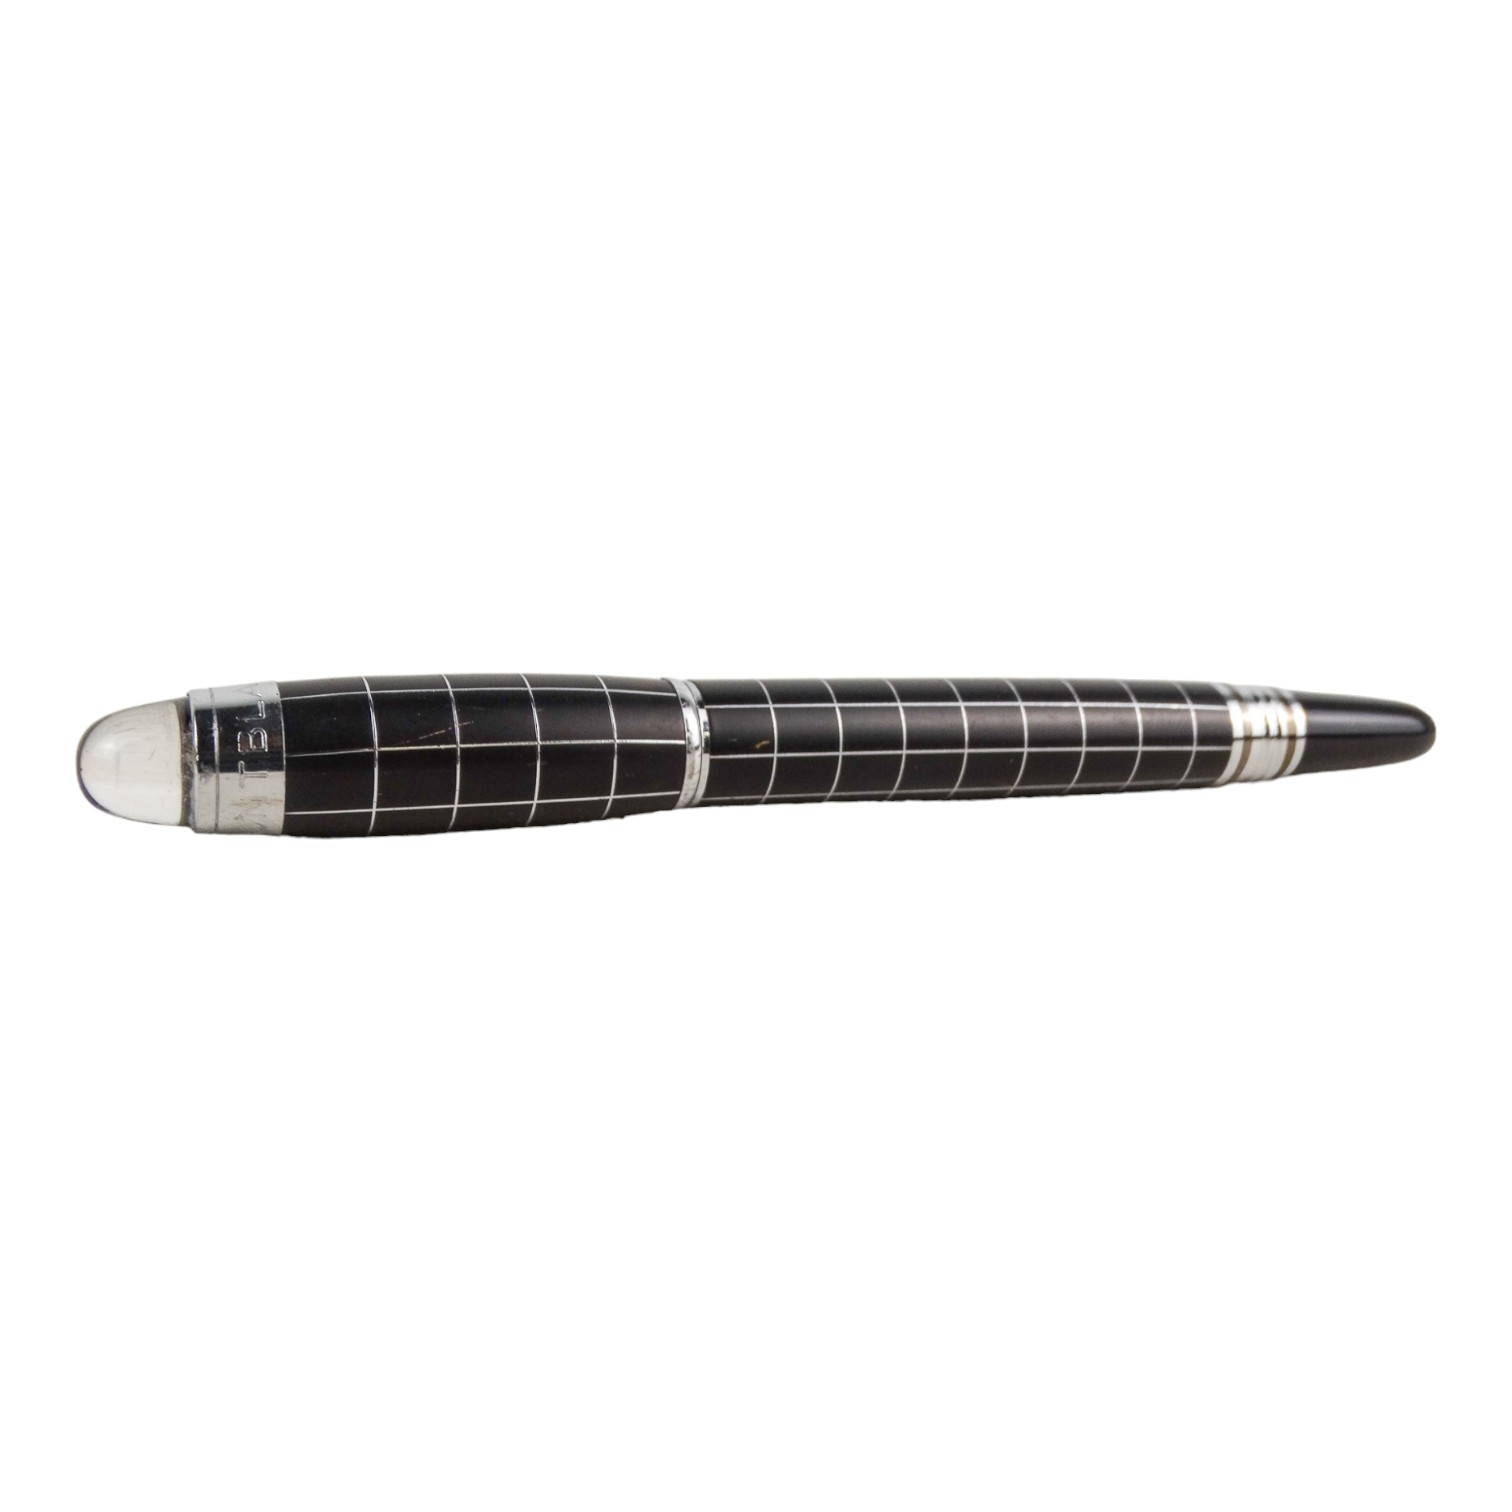 A Mont Blanc rollerball Star Walker pen - Image 6 of 6